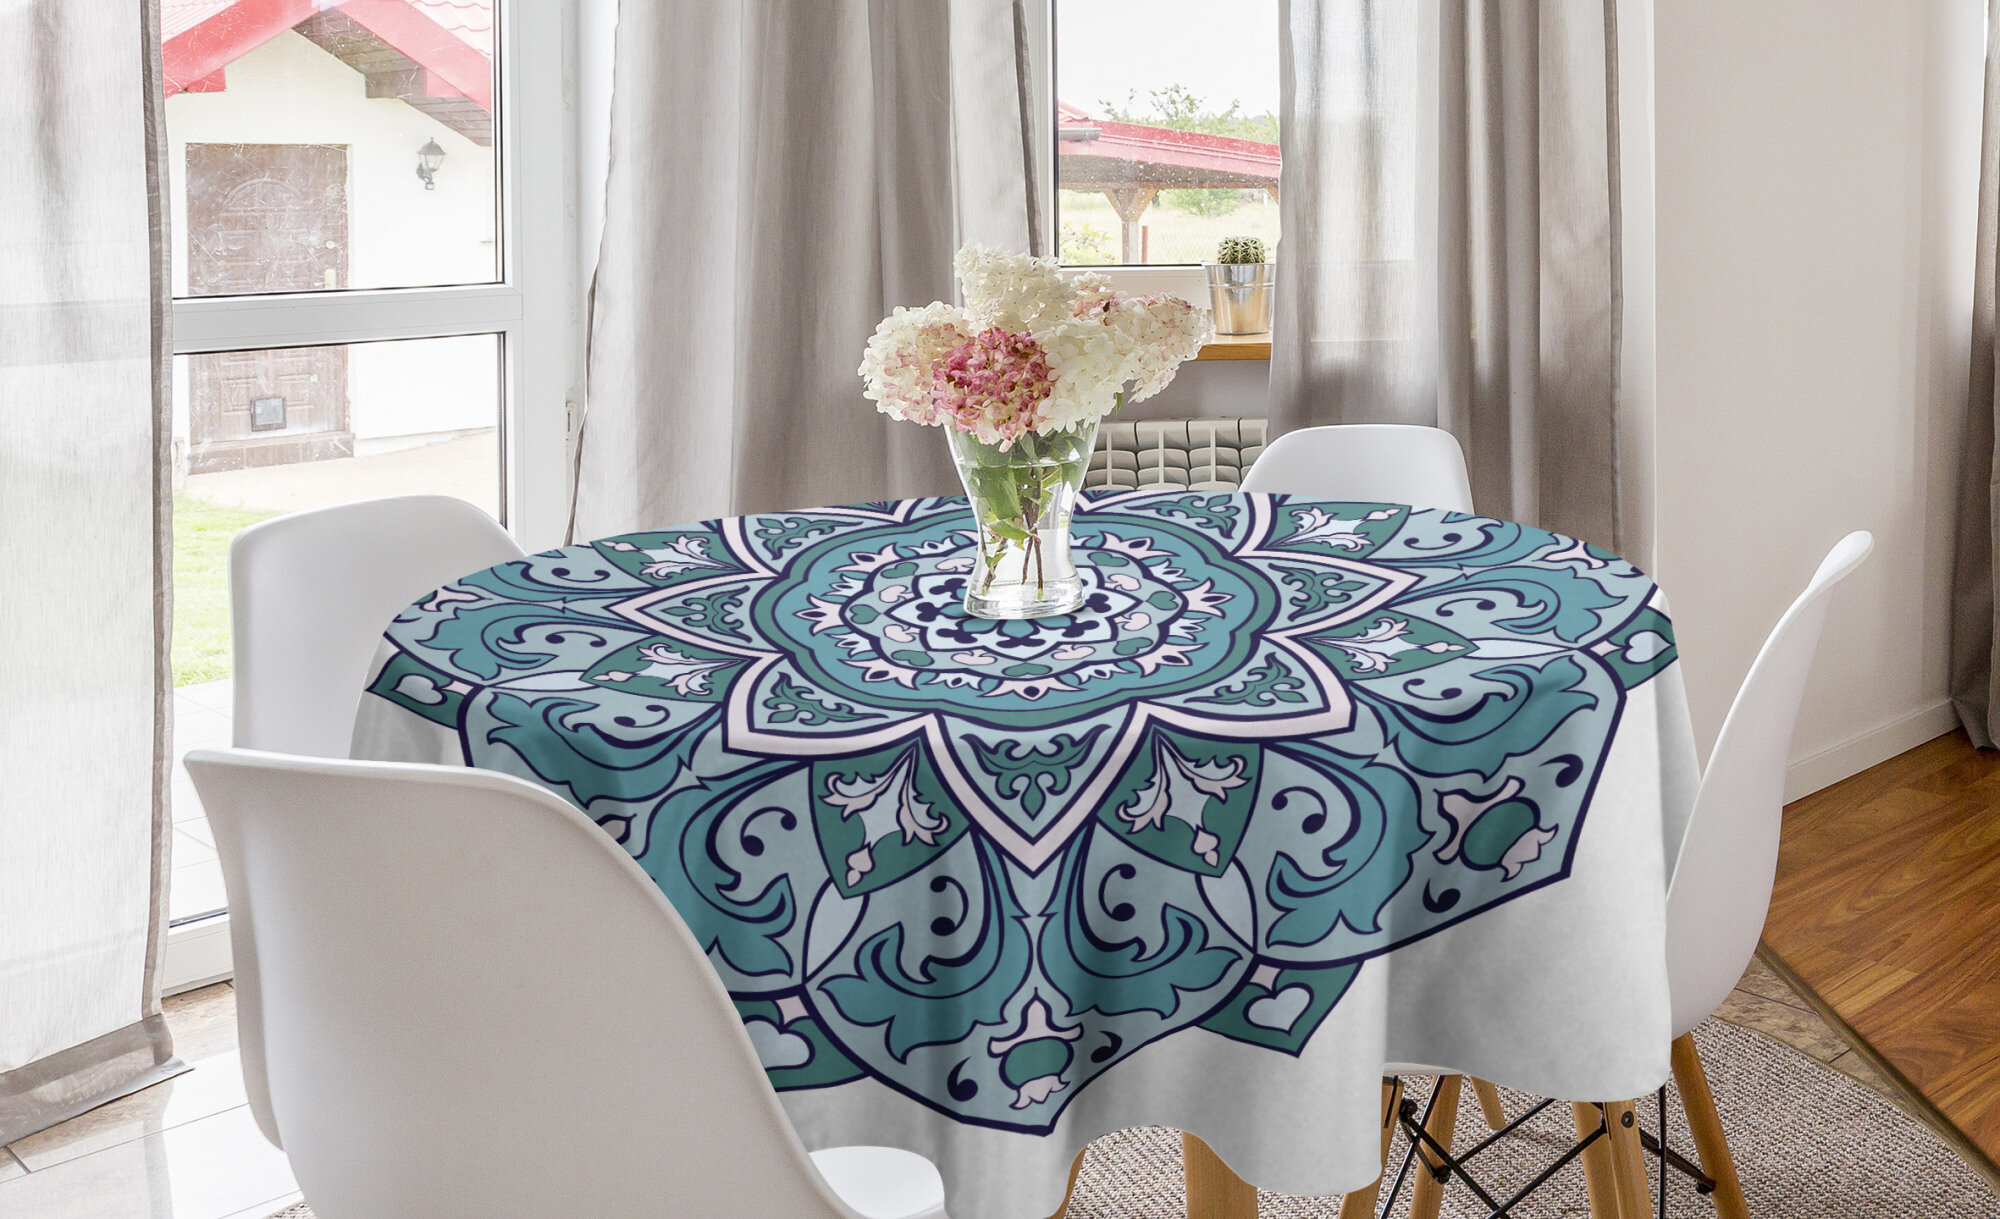 Eastern Mandala Outdoor Picnic Tablecloth in 3 Sizes Washable Waterproof